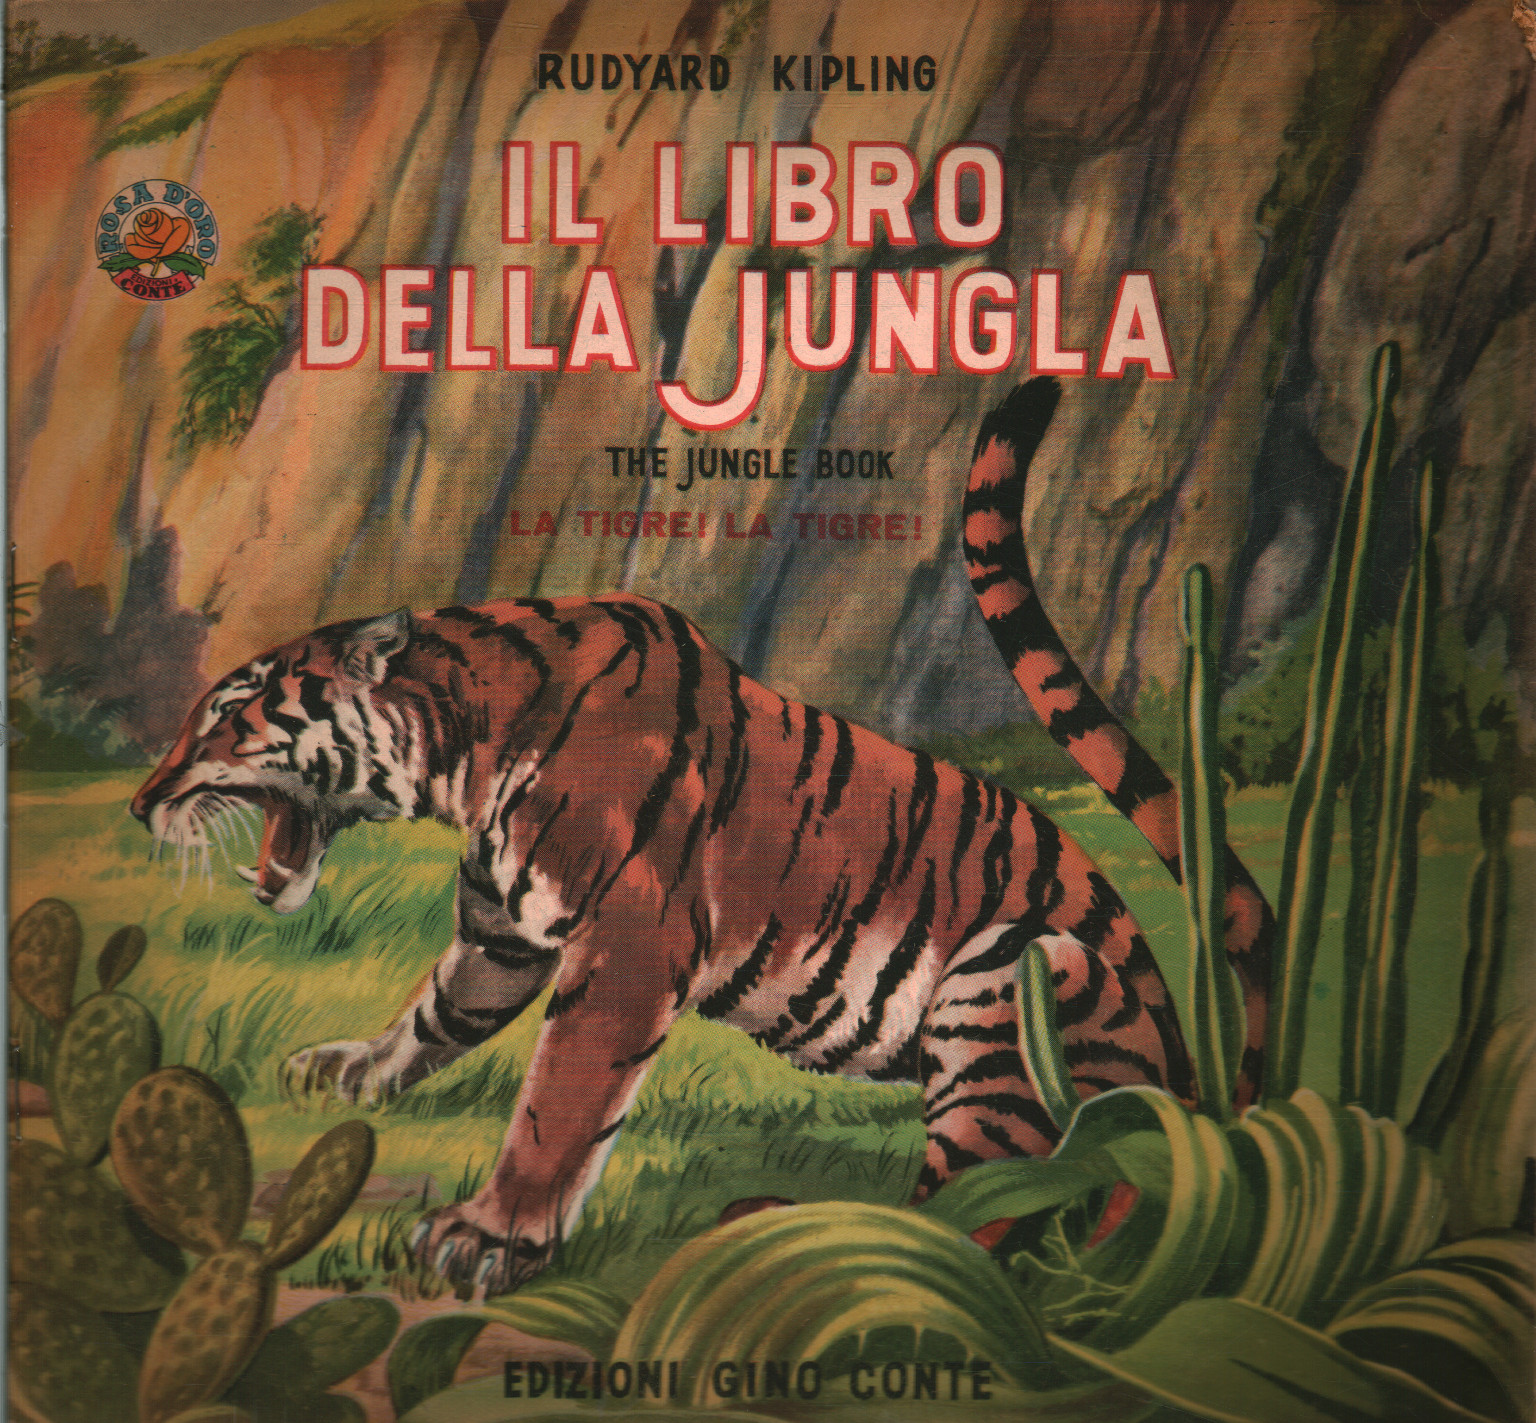 The book of the jungle. The Tiger! The Tiger !, Rudyard Kipling